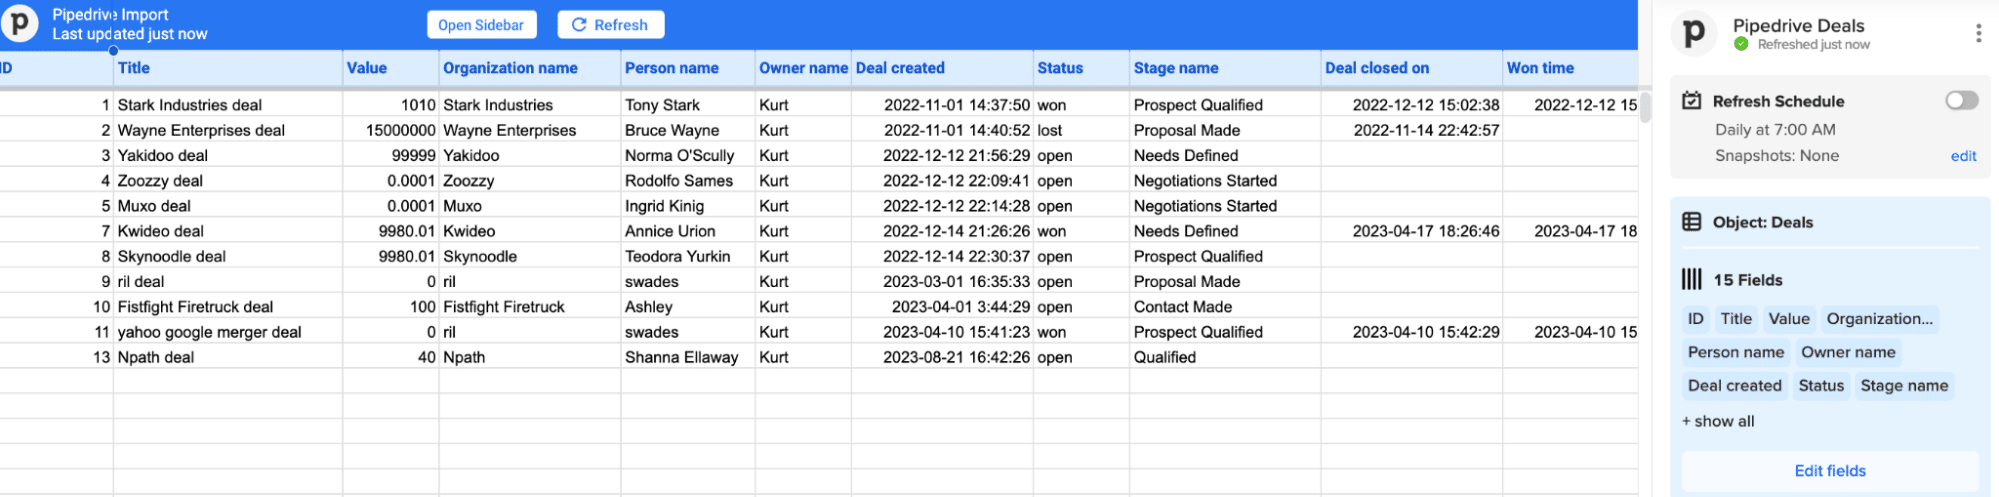  Completing the import of Pipedrive data into an Excel spreadsheet using Coefficient